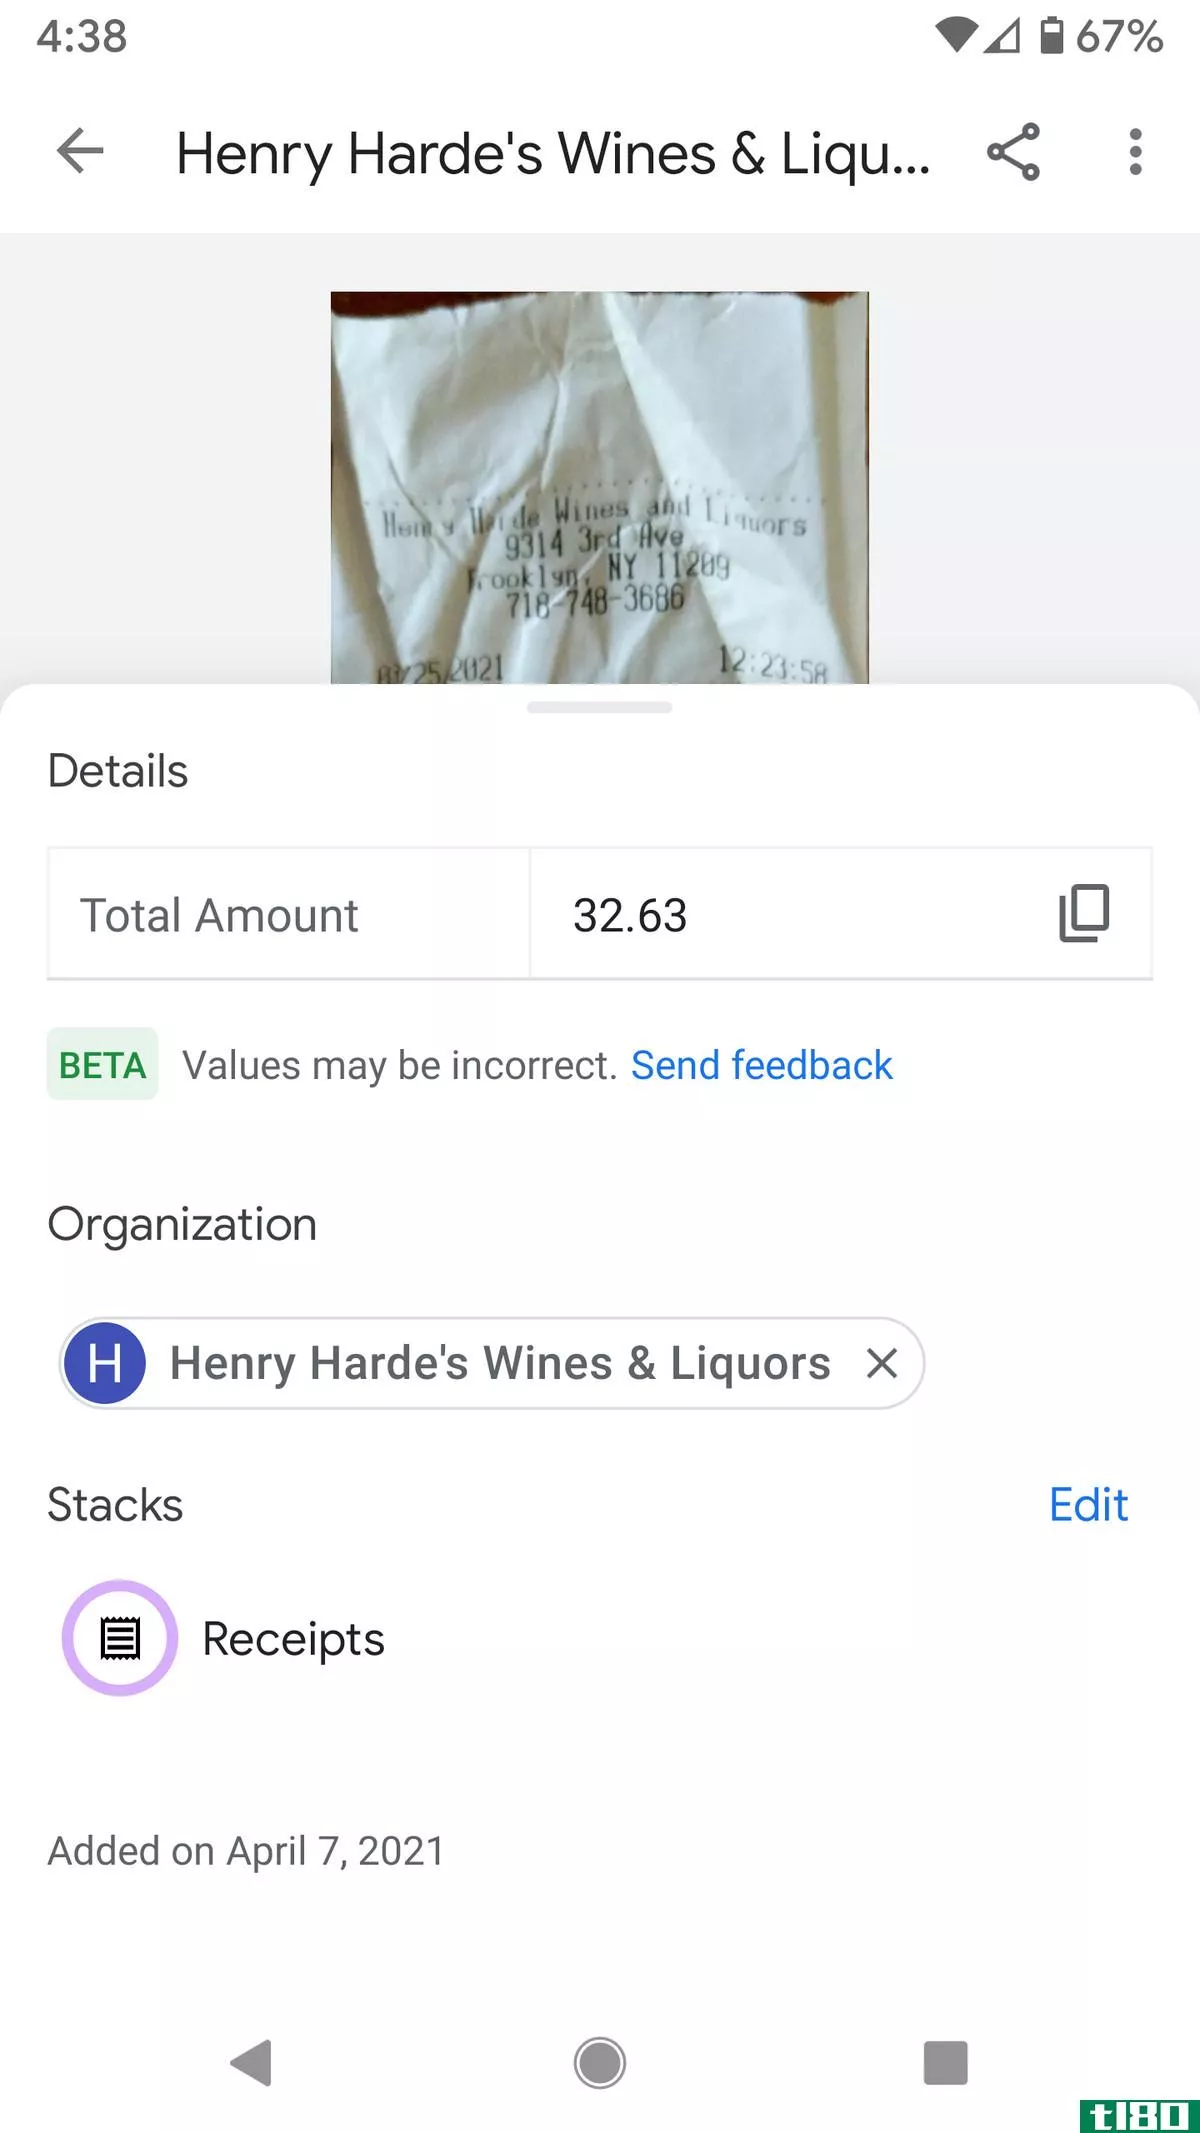 Stack’s AI pulled out data even from a crumpled receipt.